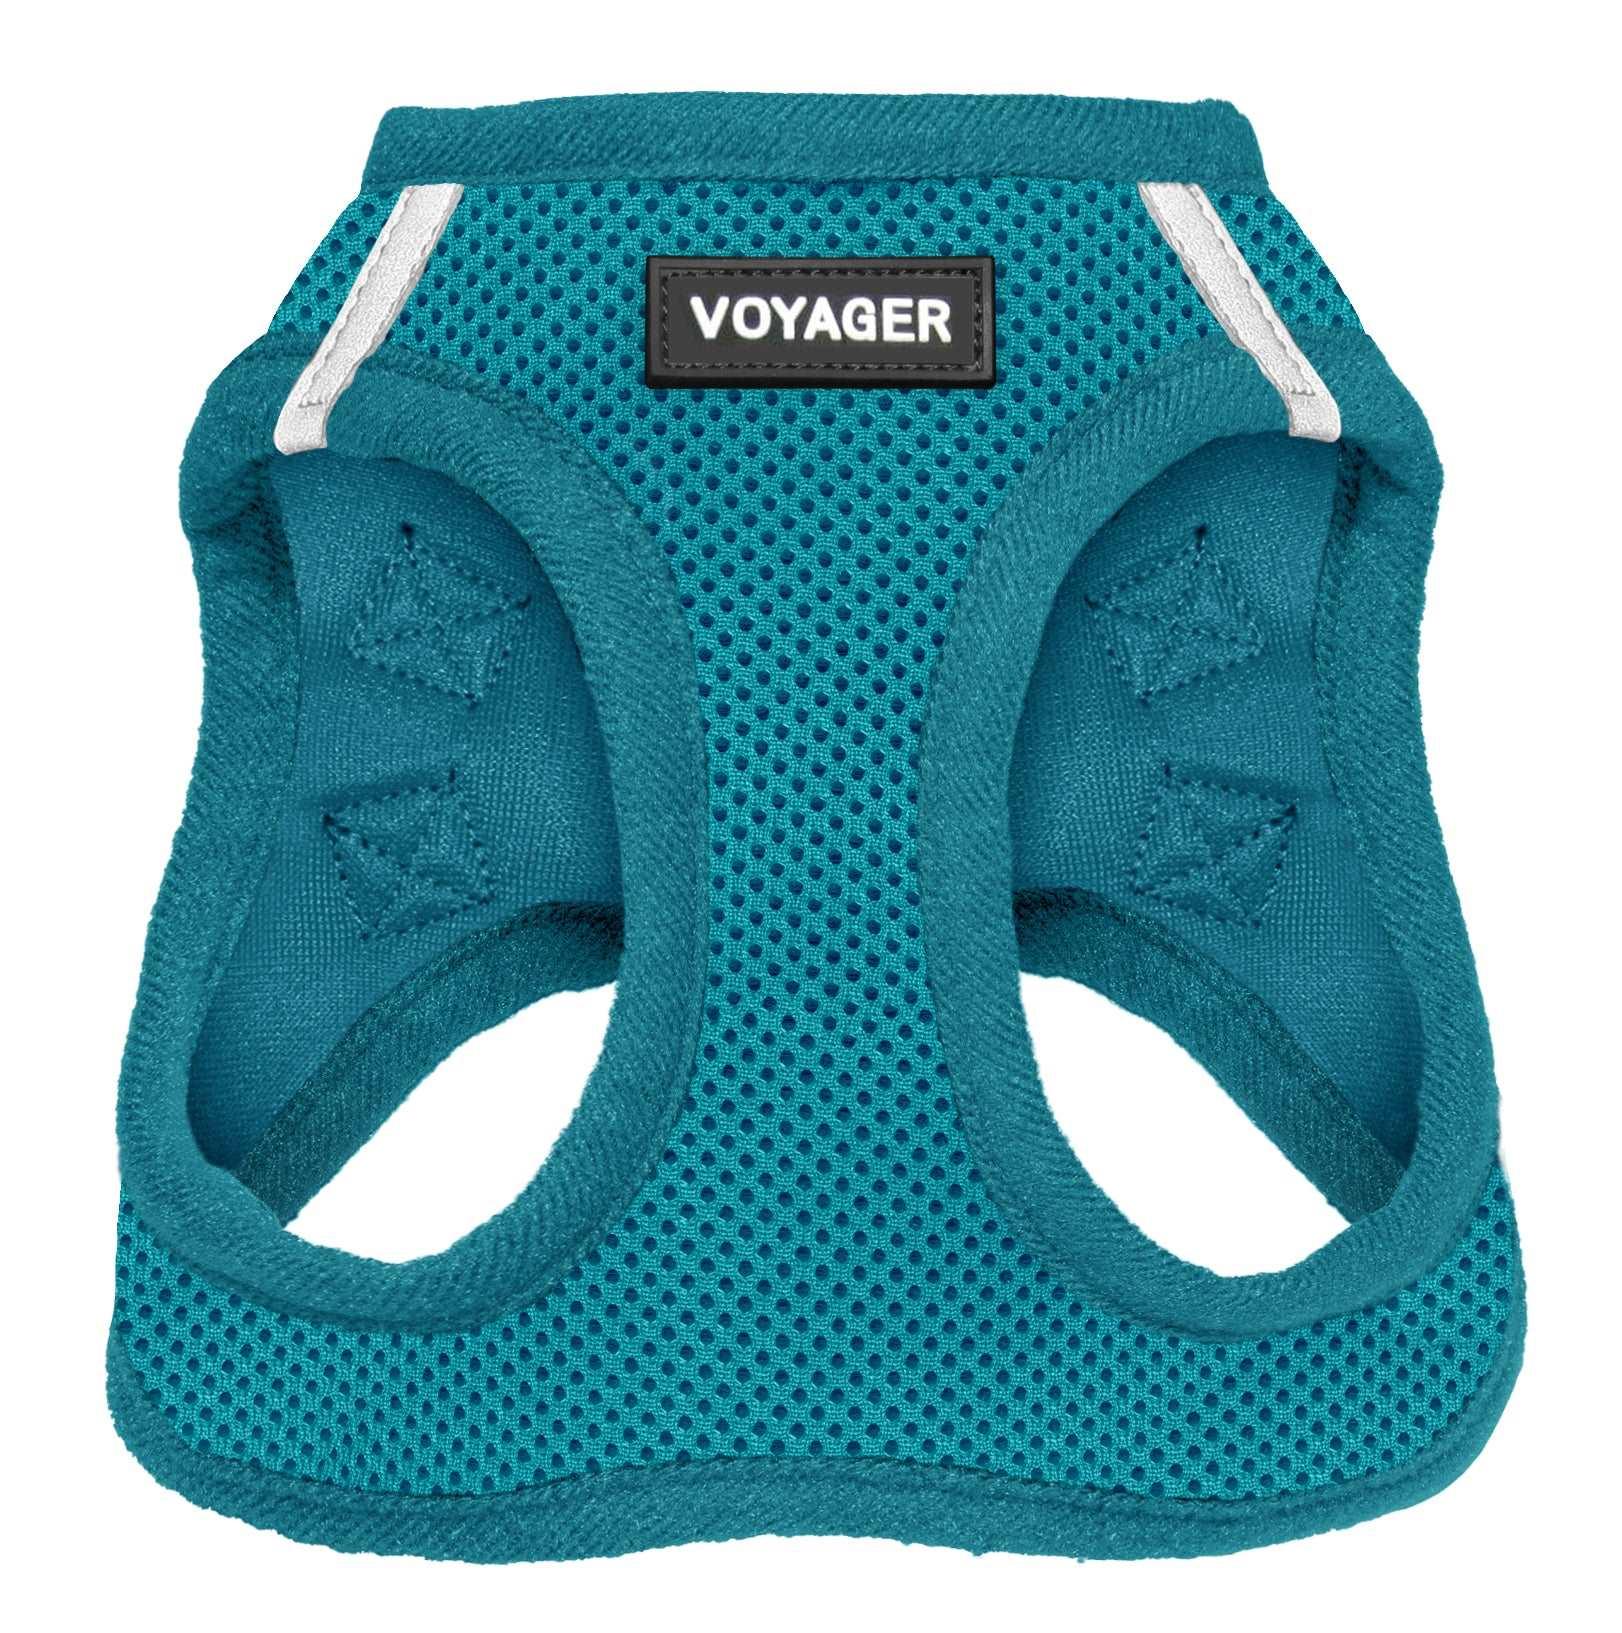 VOYAGER Step-In Air Pet Harness in Turquoise with Matching Trim and Webbing - Front